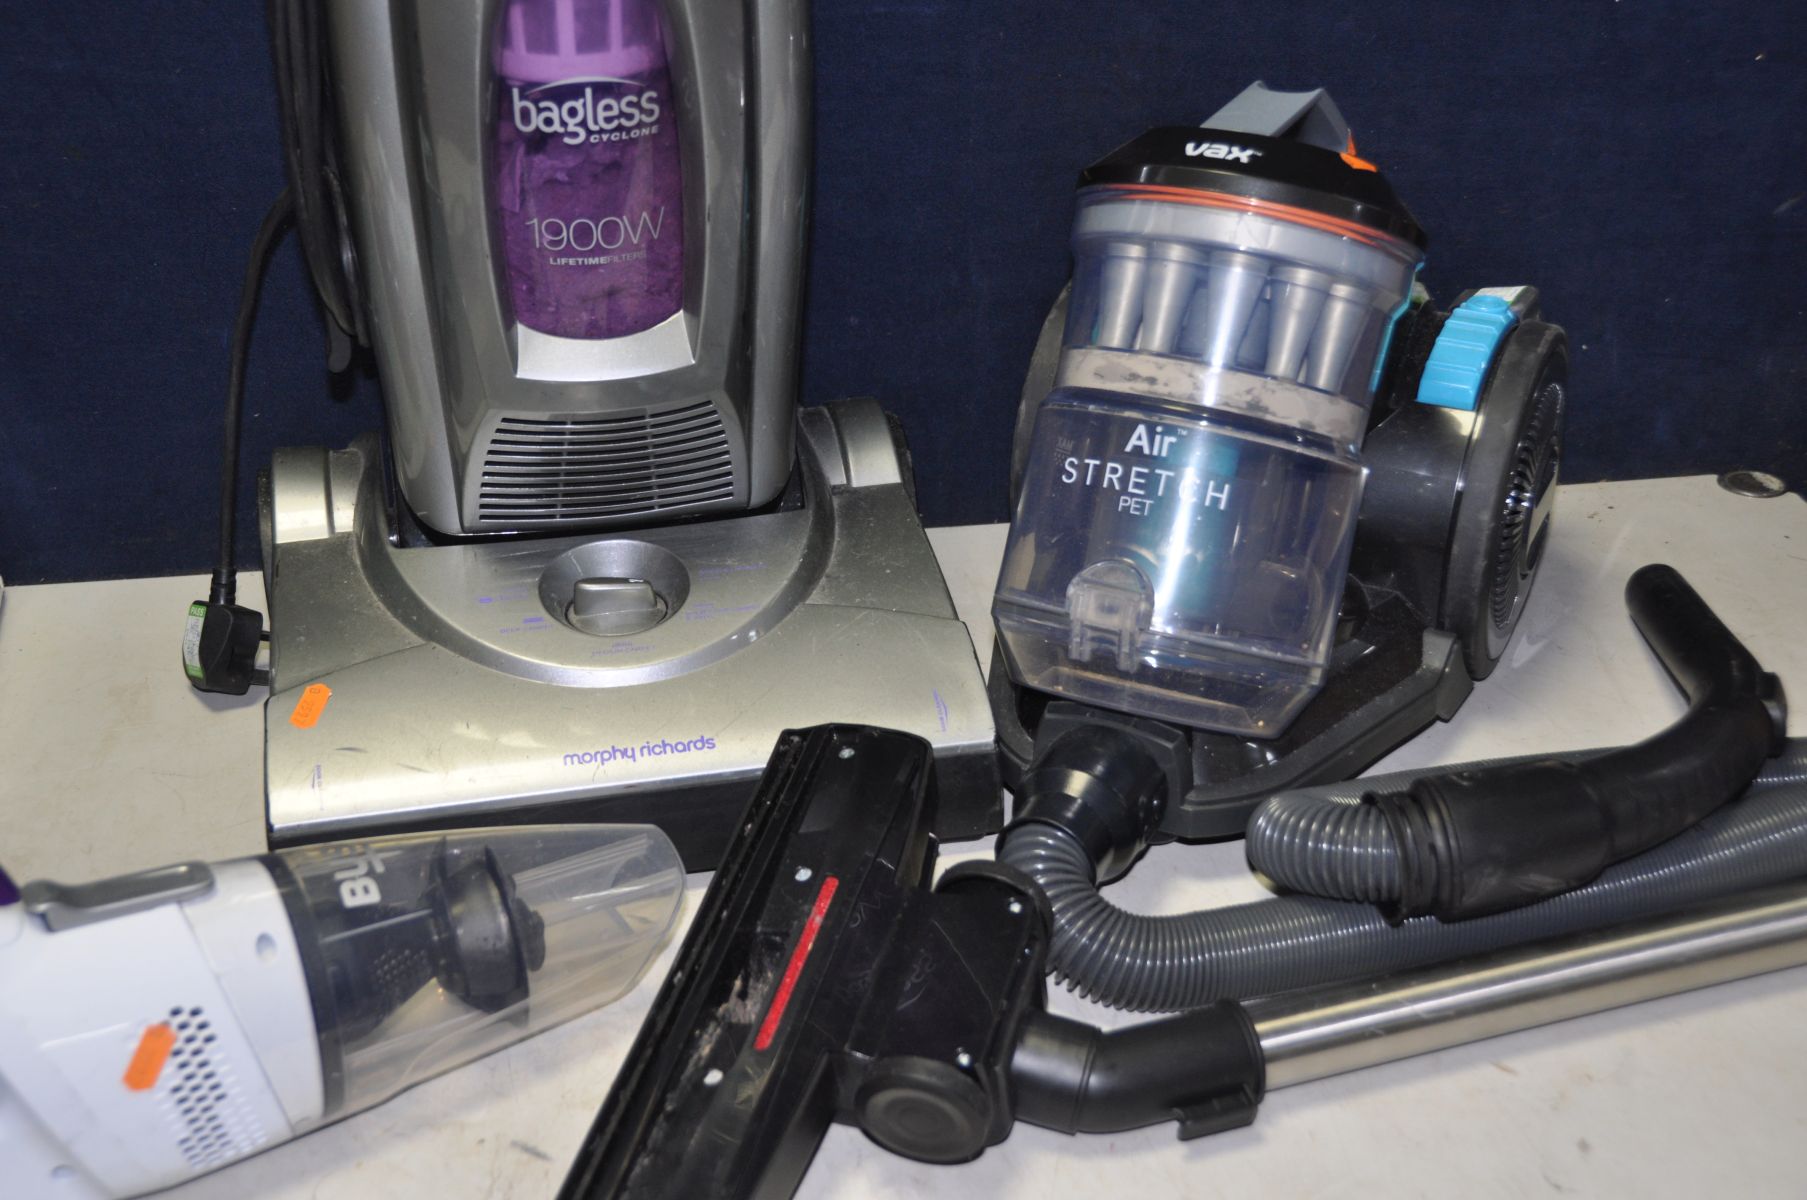 A VAX PULL ALONG VACUUM CLEANER, a Morphy Richards upright vacuum cleaner, a Pro Action hand held - Image 3 of 3